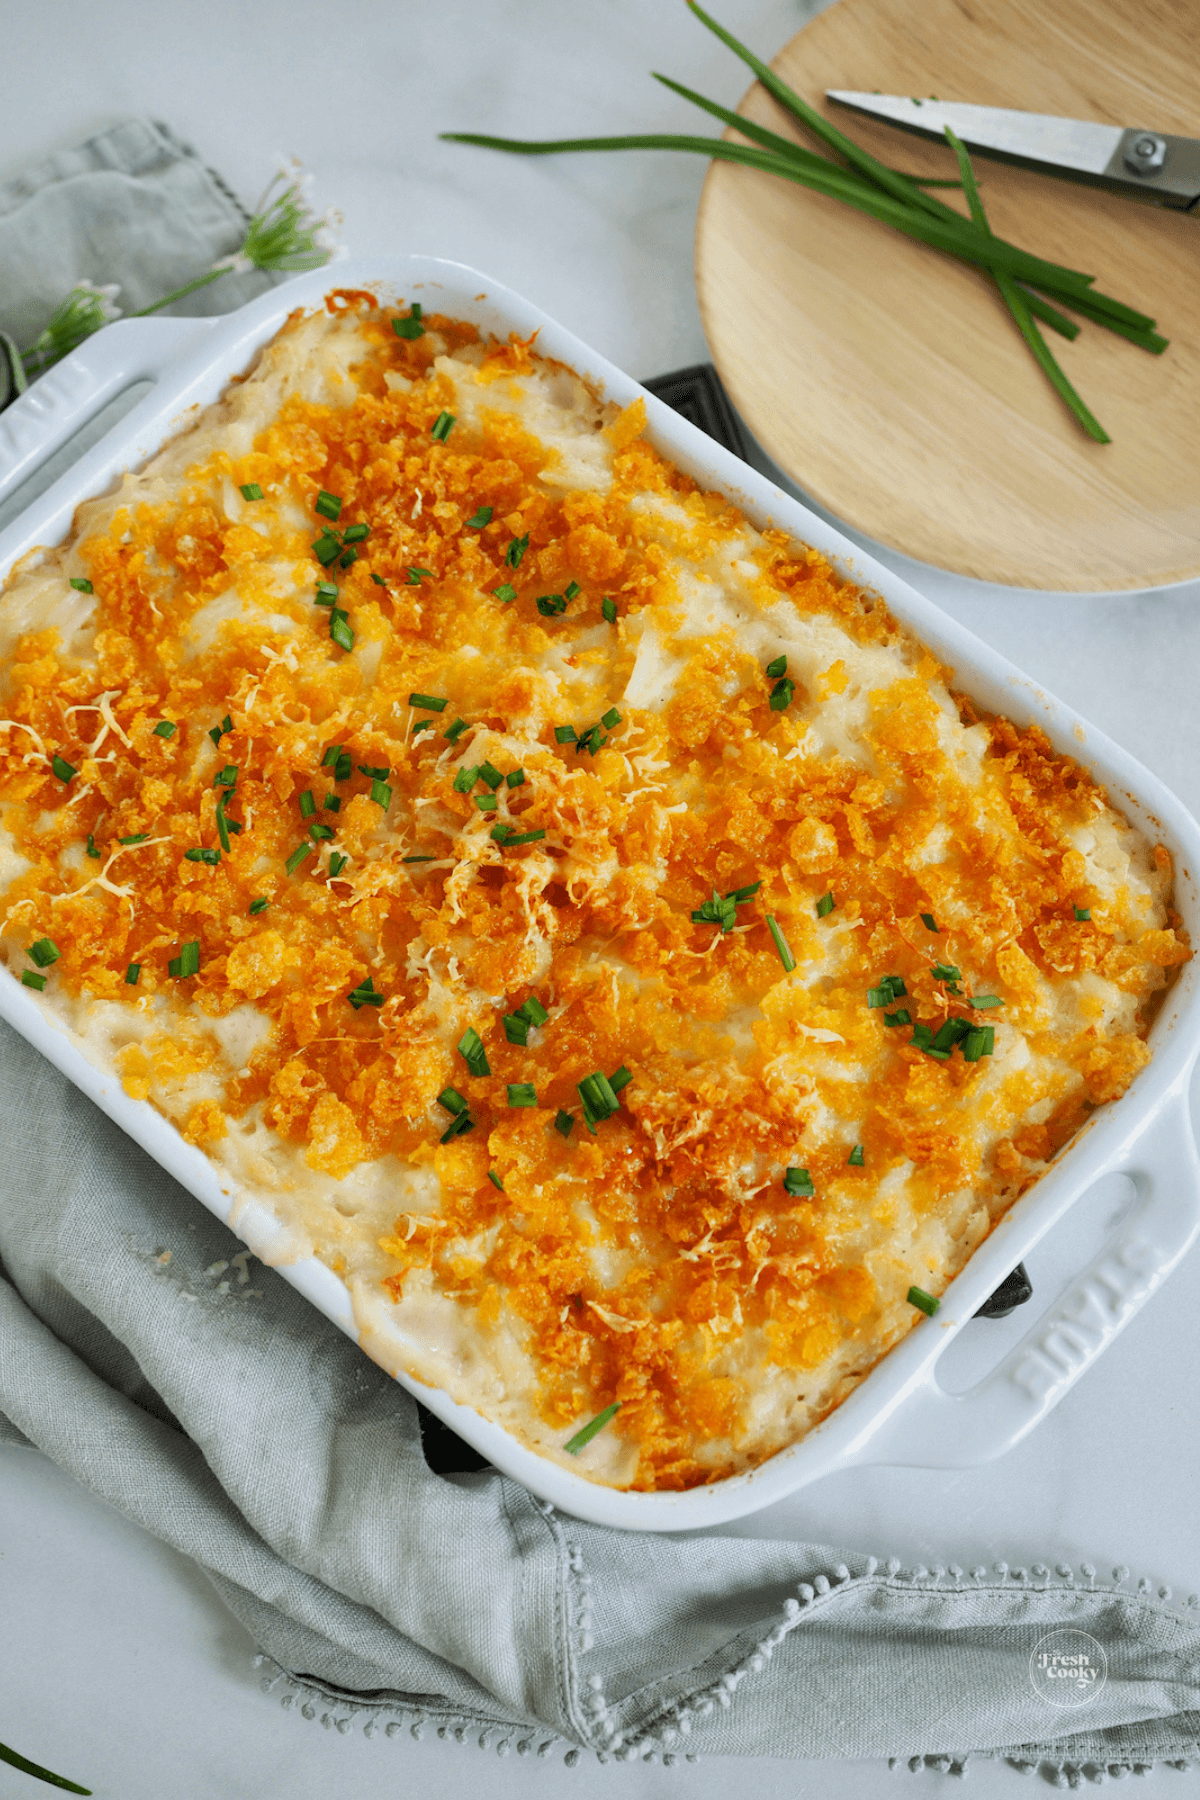 Hashbrown casserole recipe with corn flakes, baked and ready to serve.